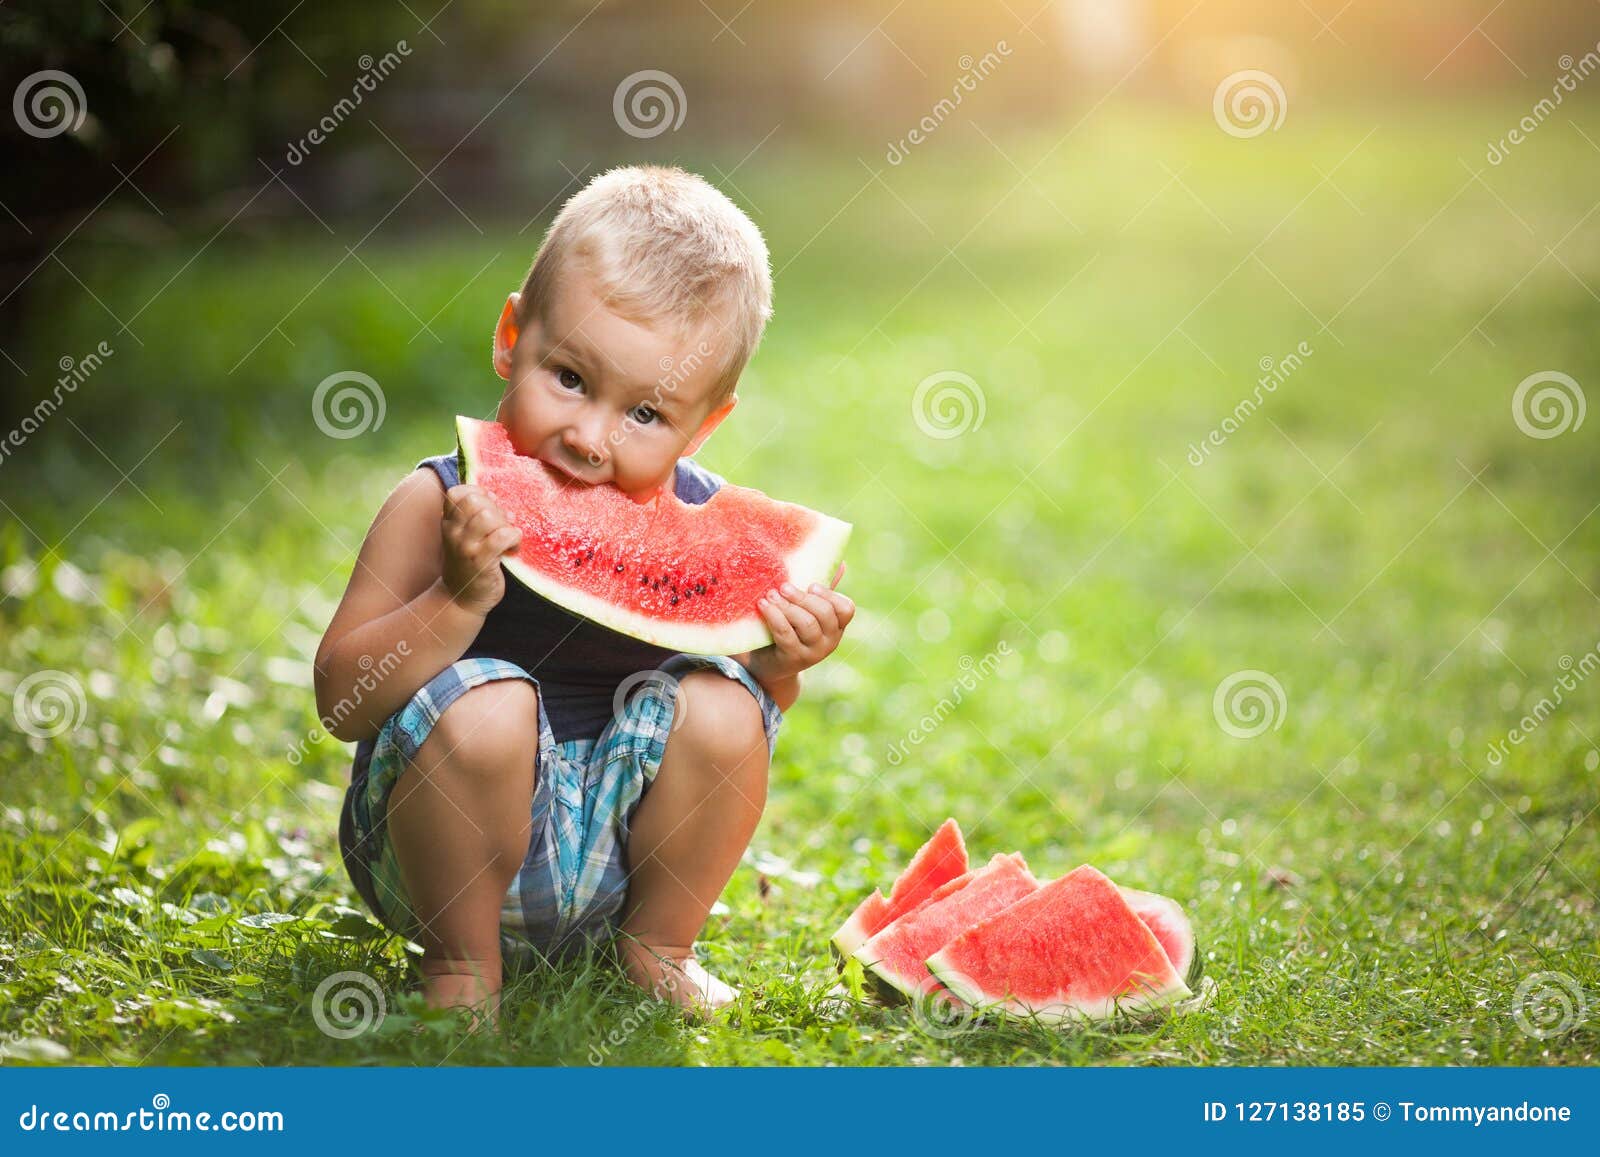 cute toddler eating a slice of watermelon